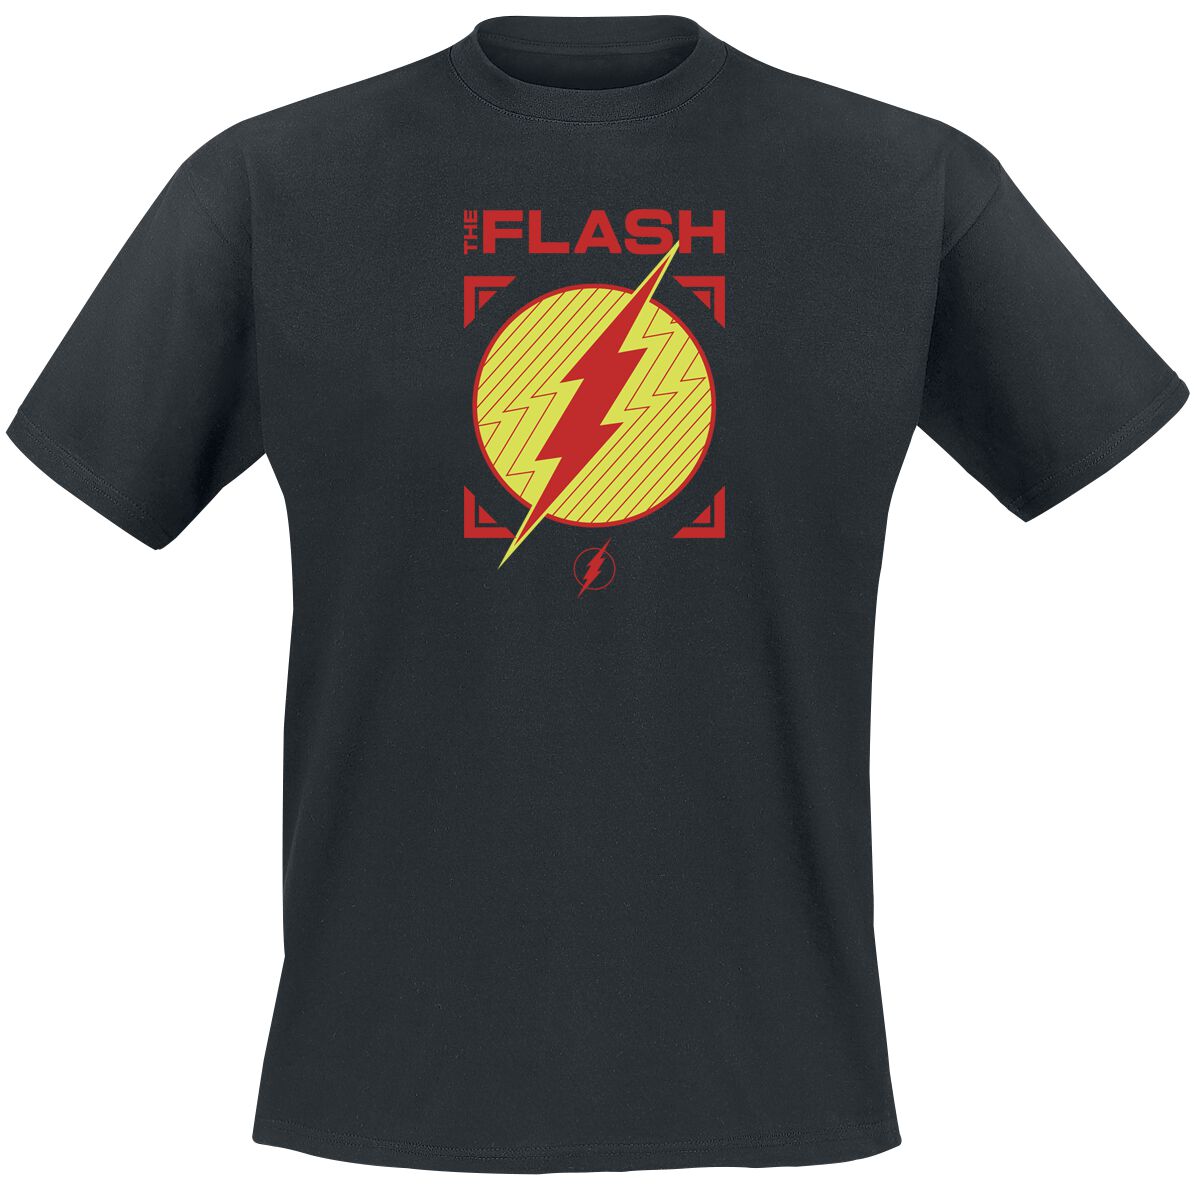 The Flash Flash - Central City All Stars T-Shirt schwarz in M